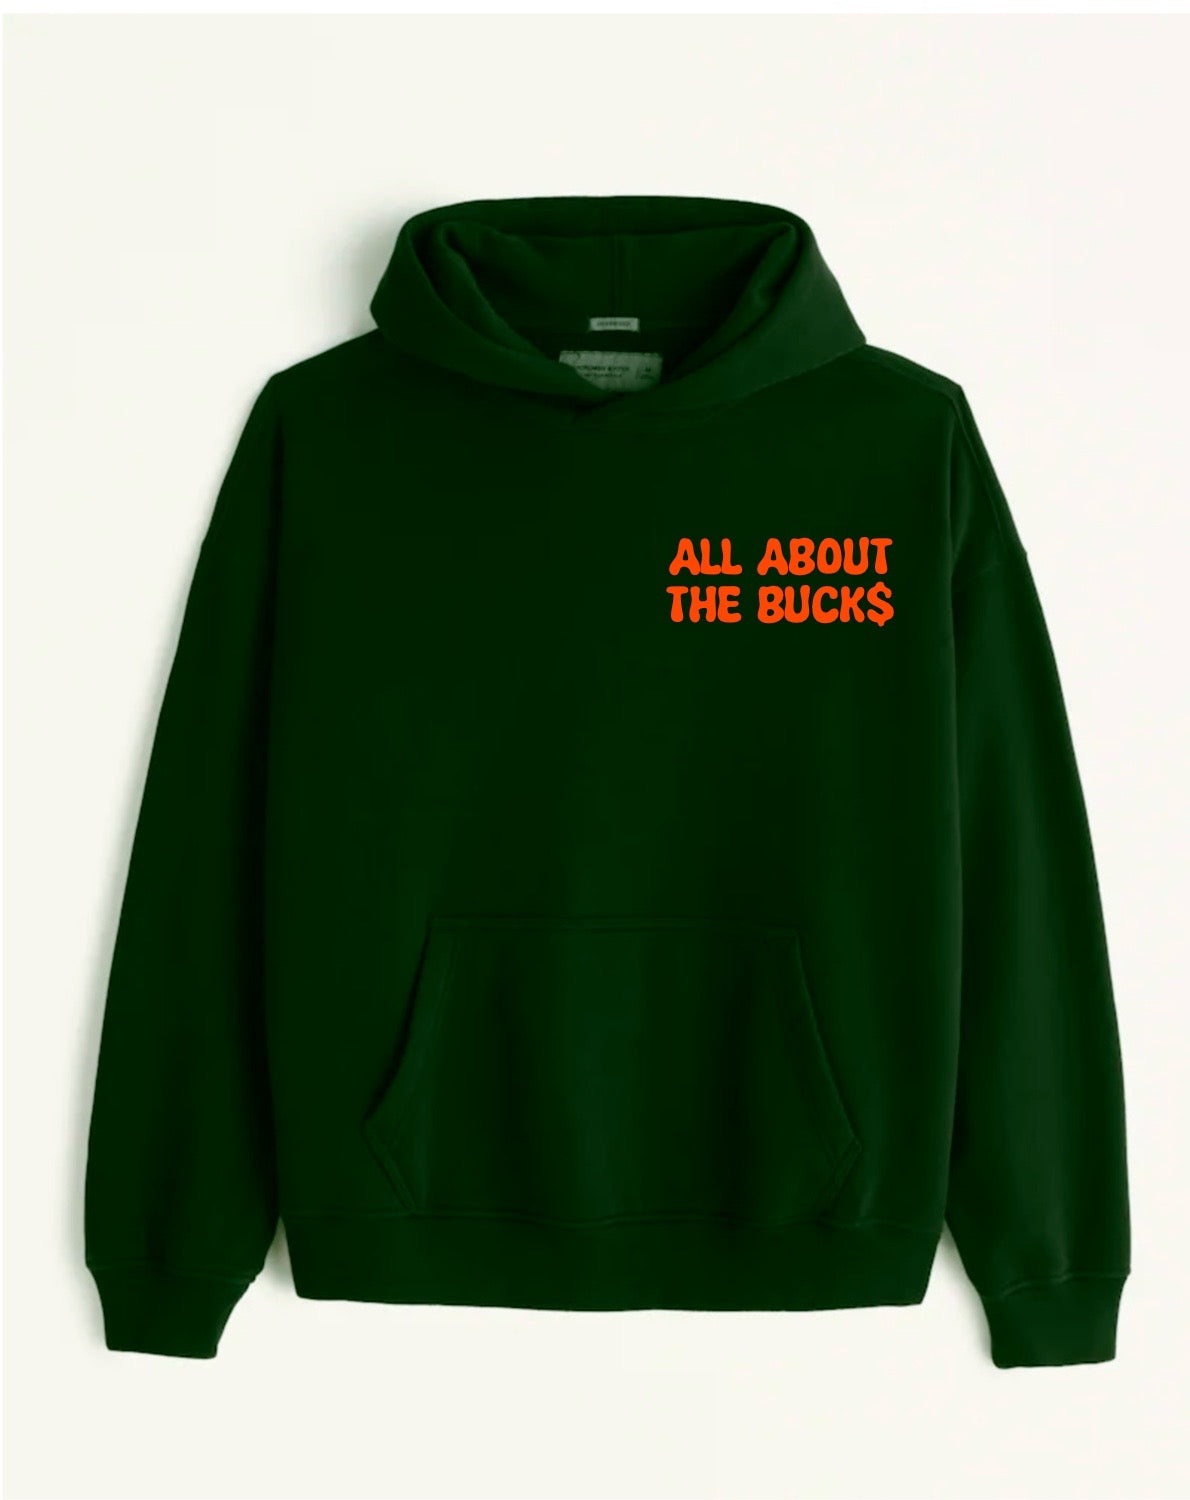 Hoodies on Sale 3 for $75 at checkout